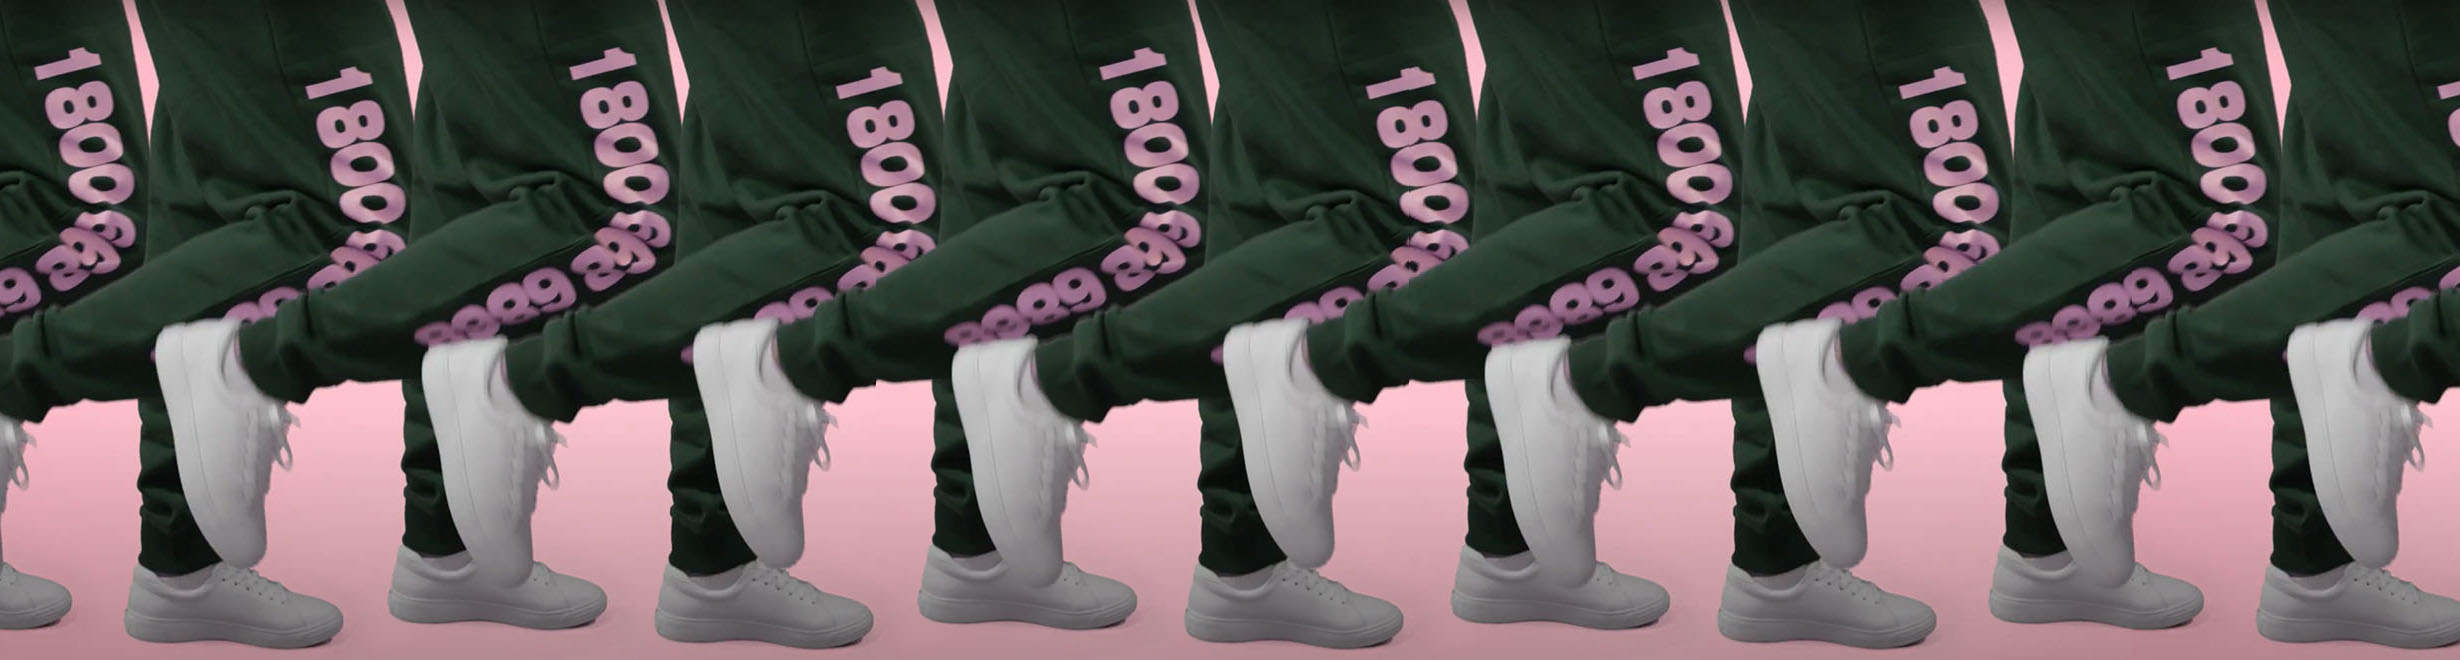 Image of a person's legs, wearing green sweatpants with pink printing on the side